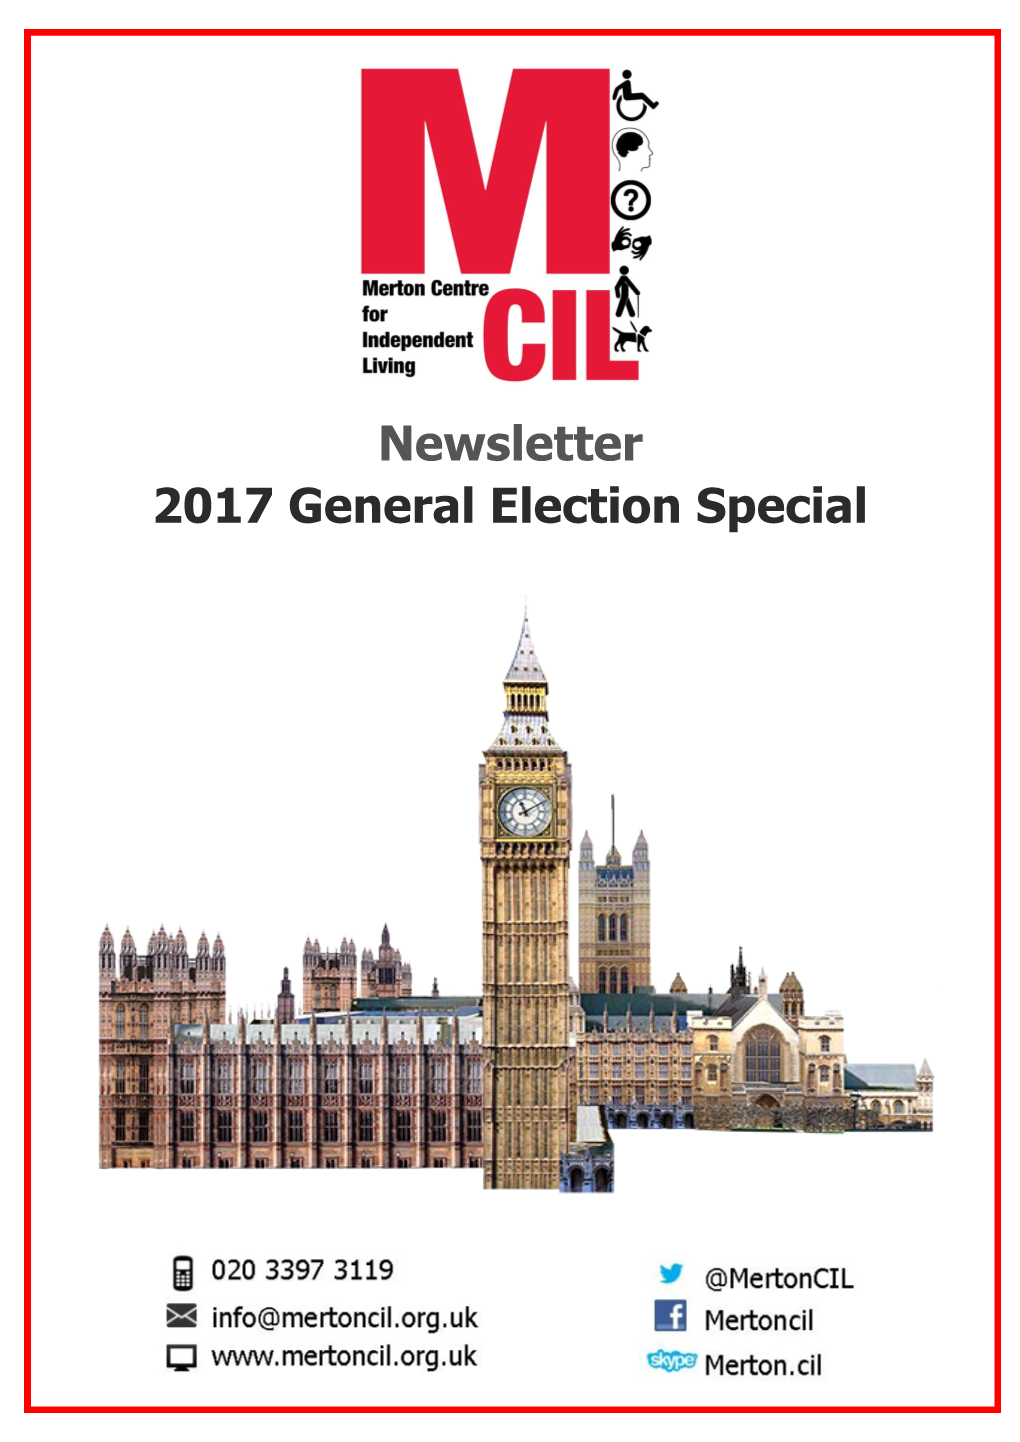 Newsletter 2017 General Election Special